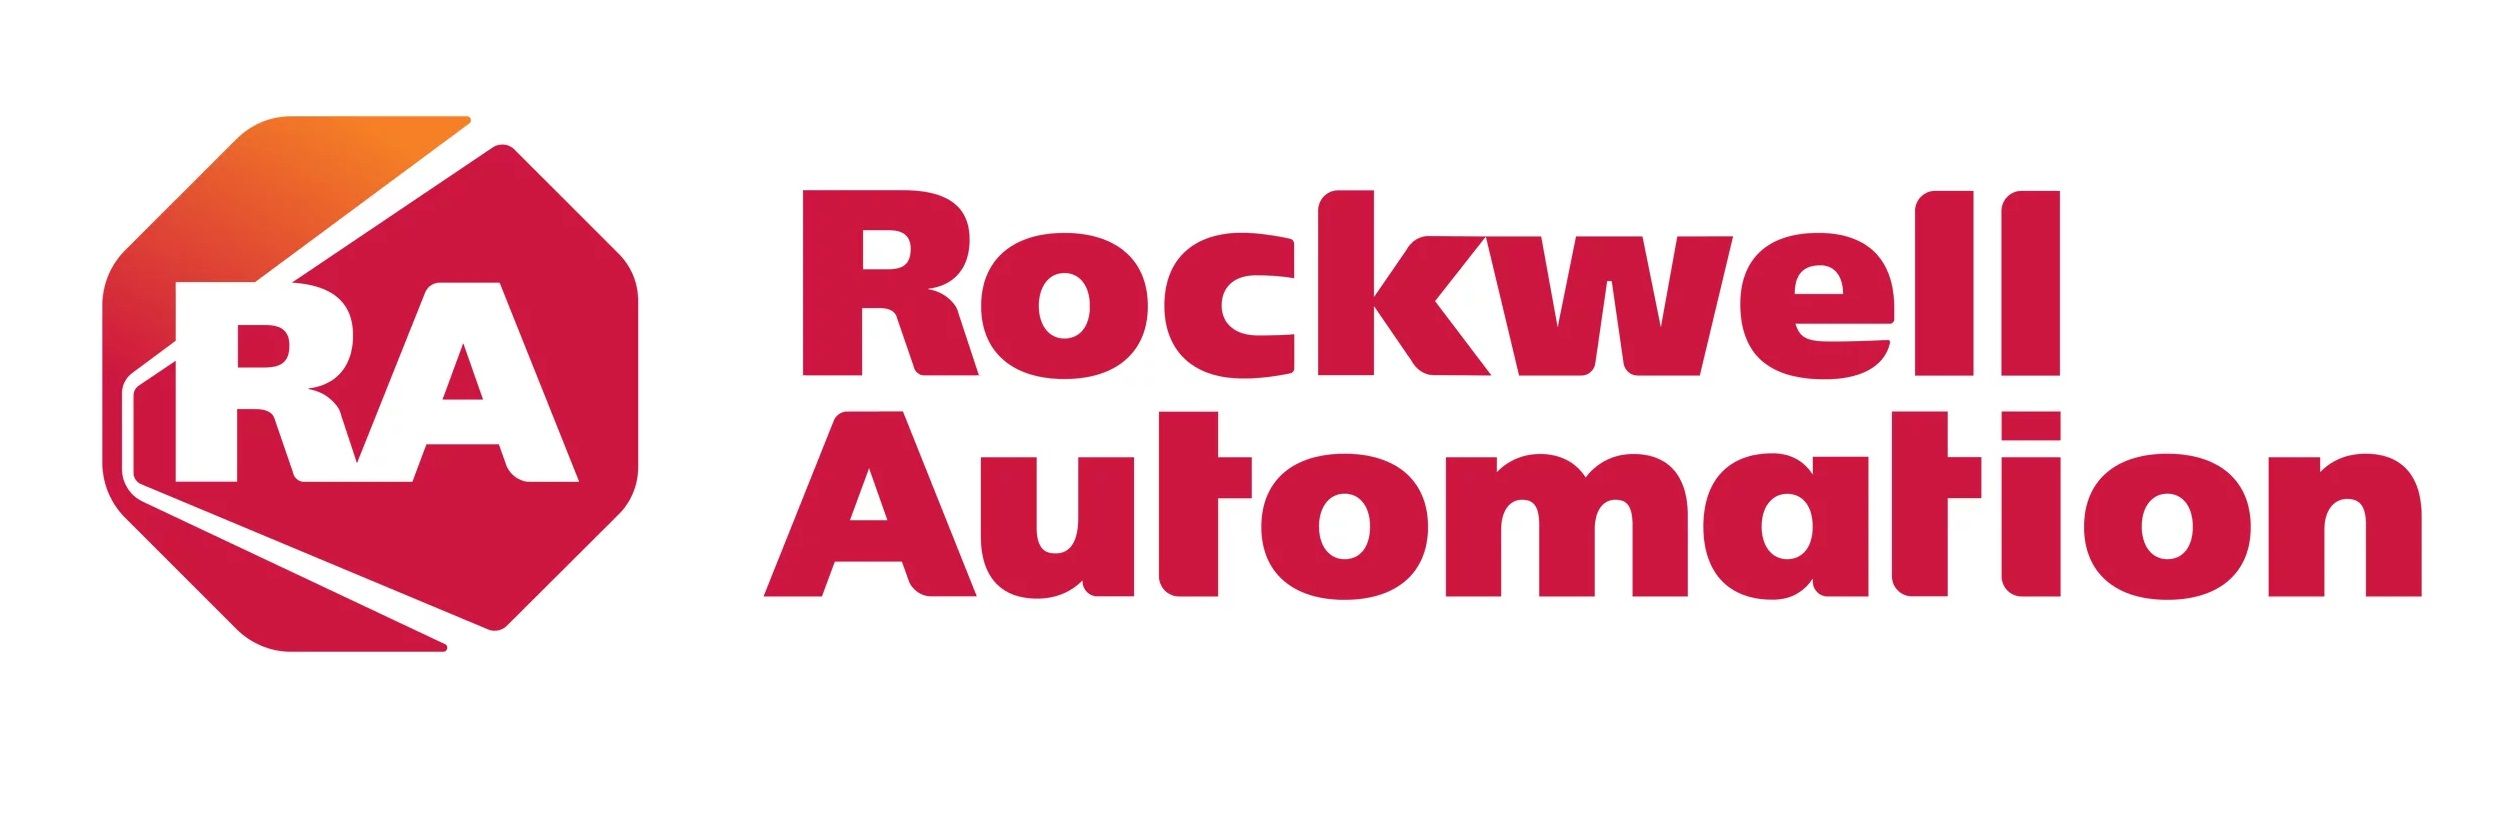 Rockwell Automation hiring TEST AUTOMATION ENGINEER